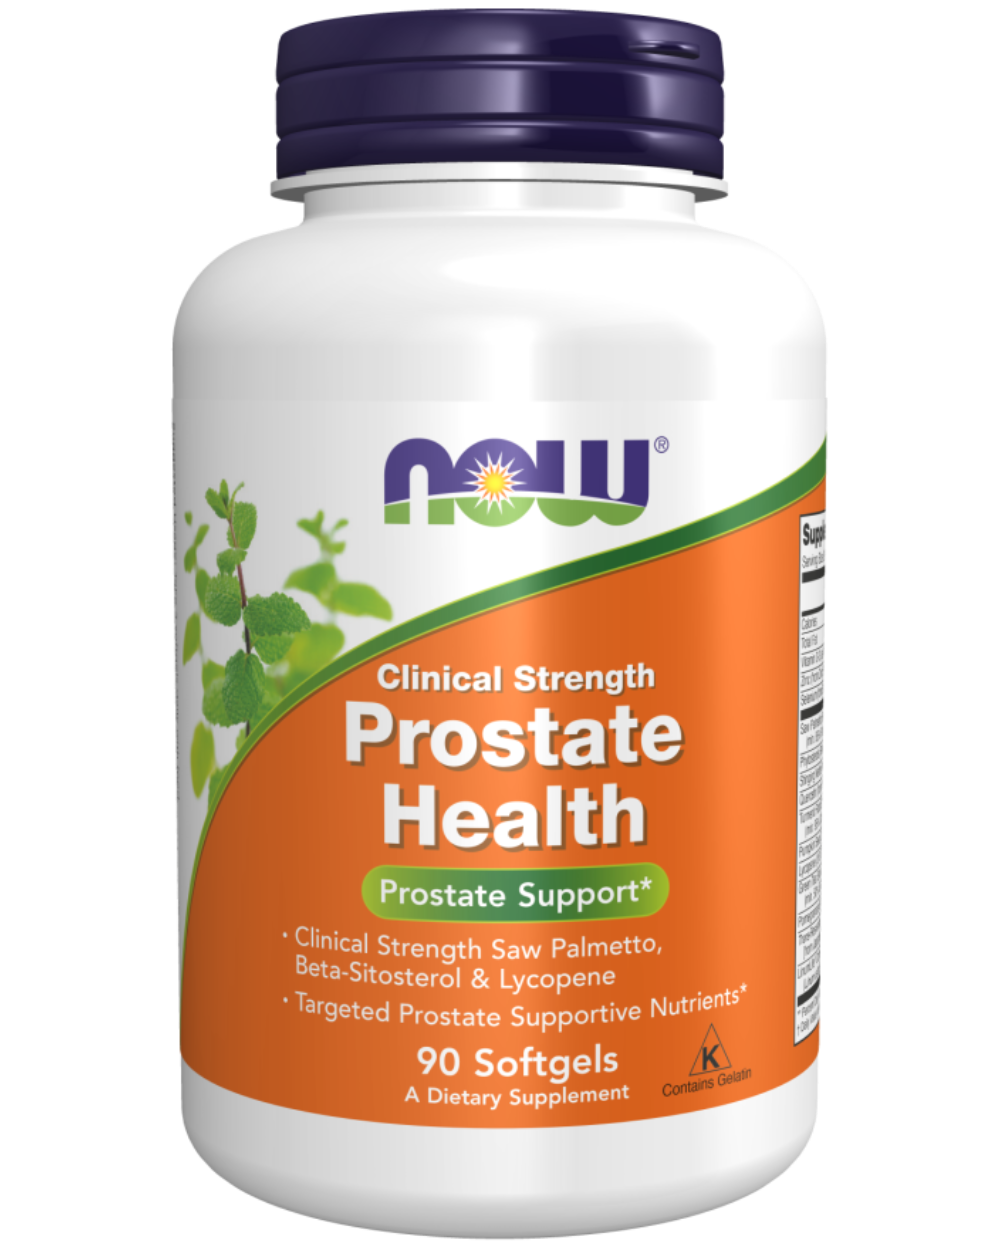 Prostate Health Clenical Strength